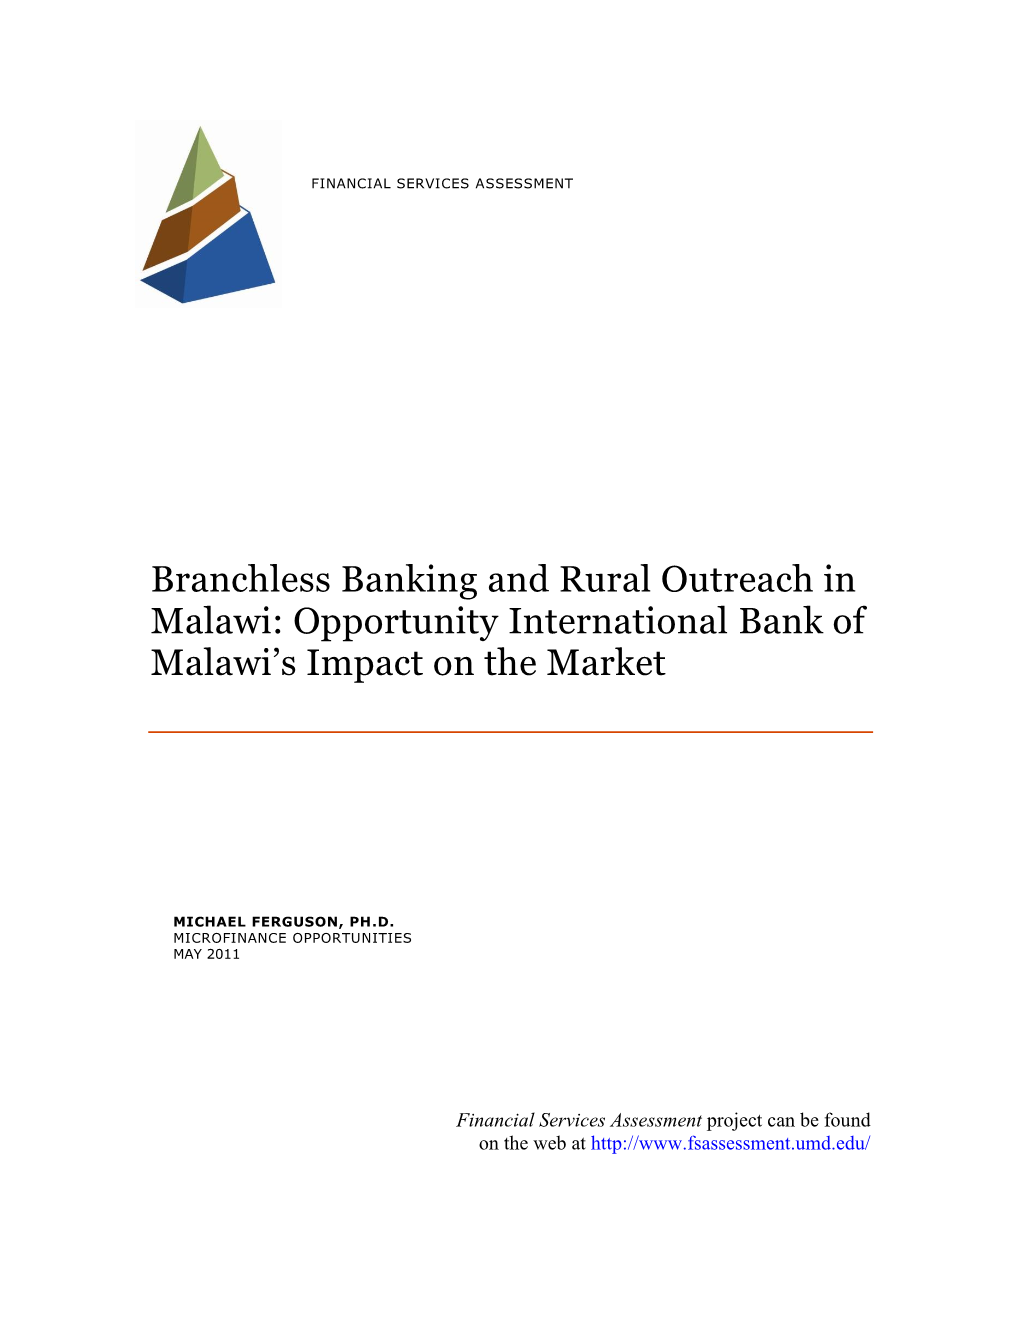 Branchless Banking and Rural Outreach in Malawi: Opportunity International Bank of Malawi‘S Impact on the Market